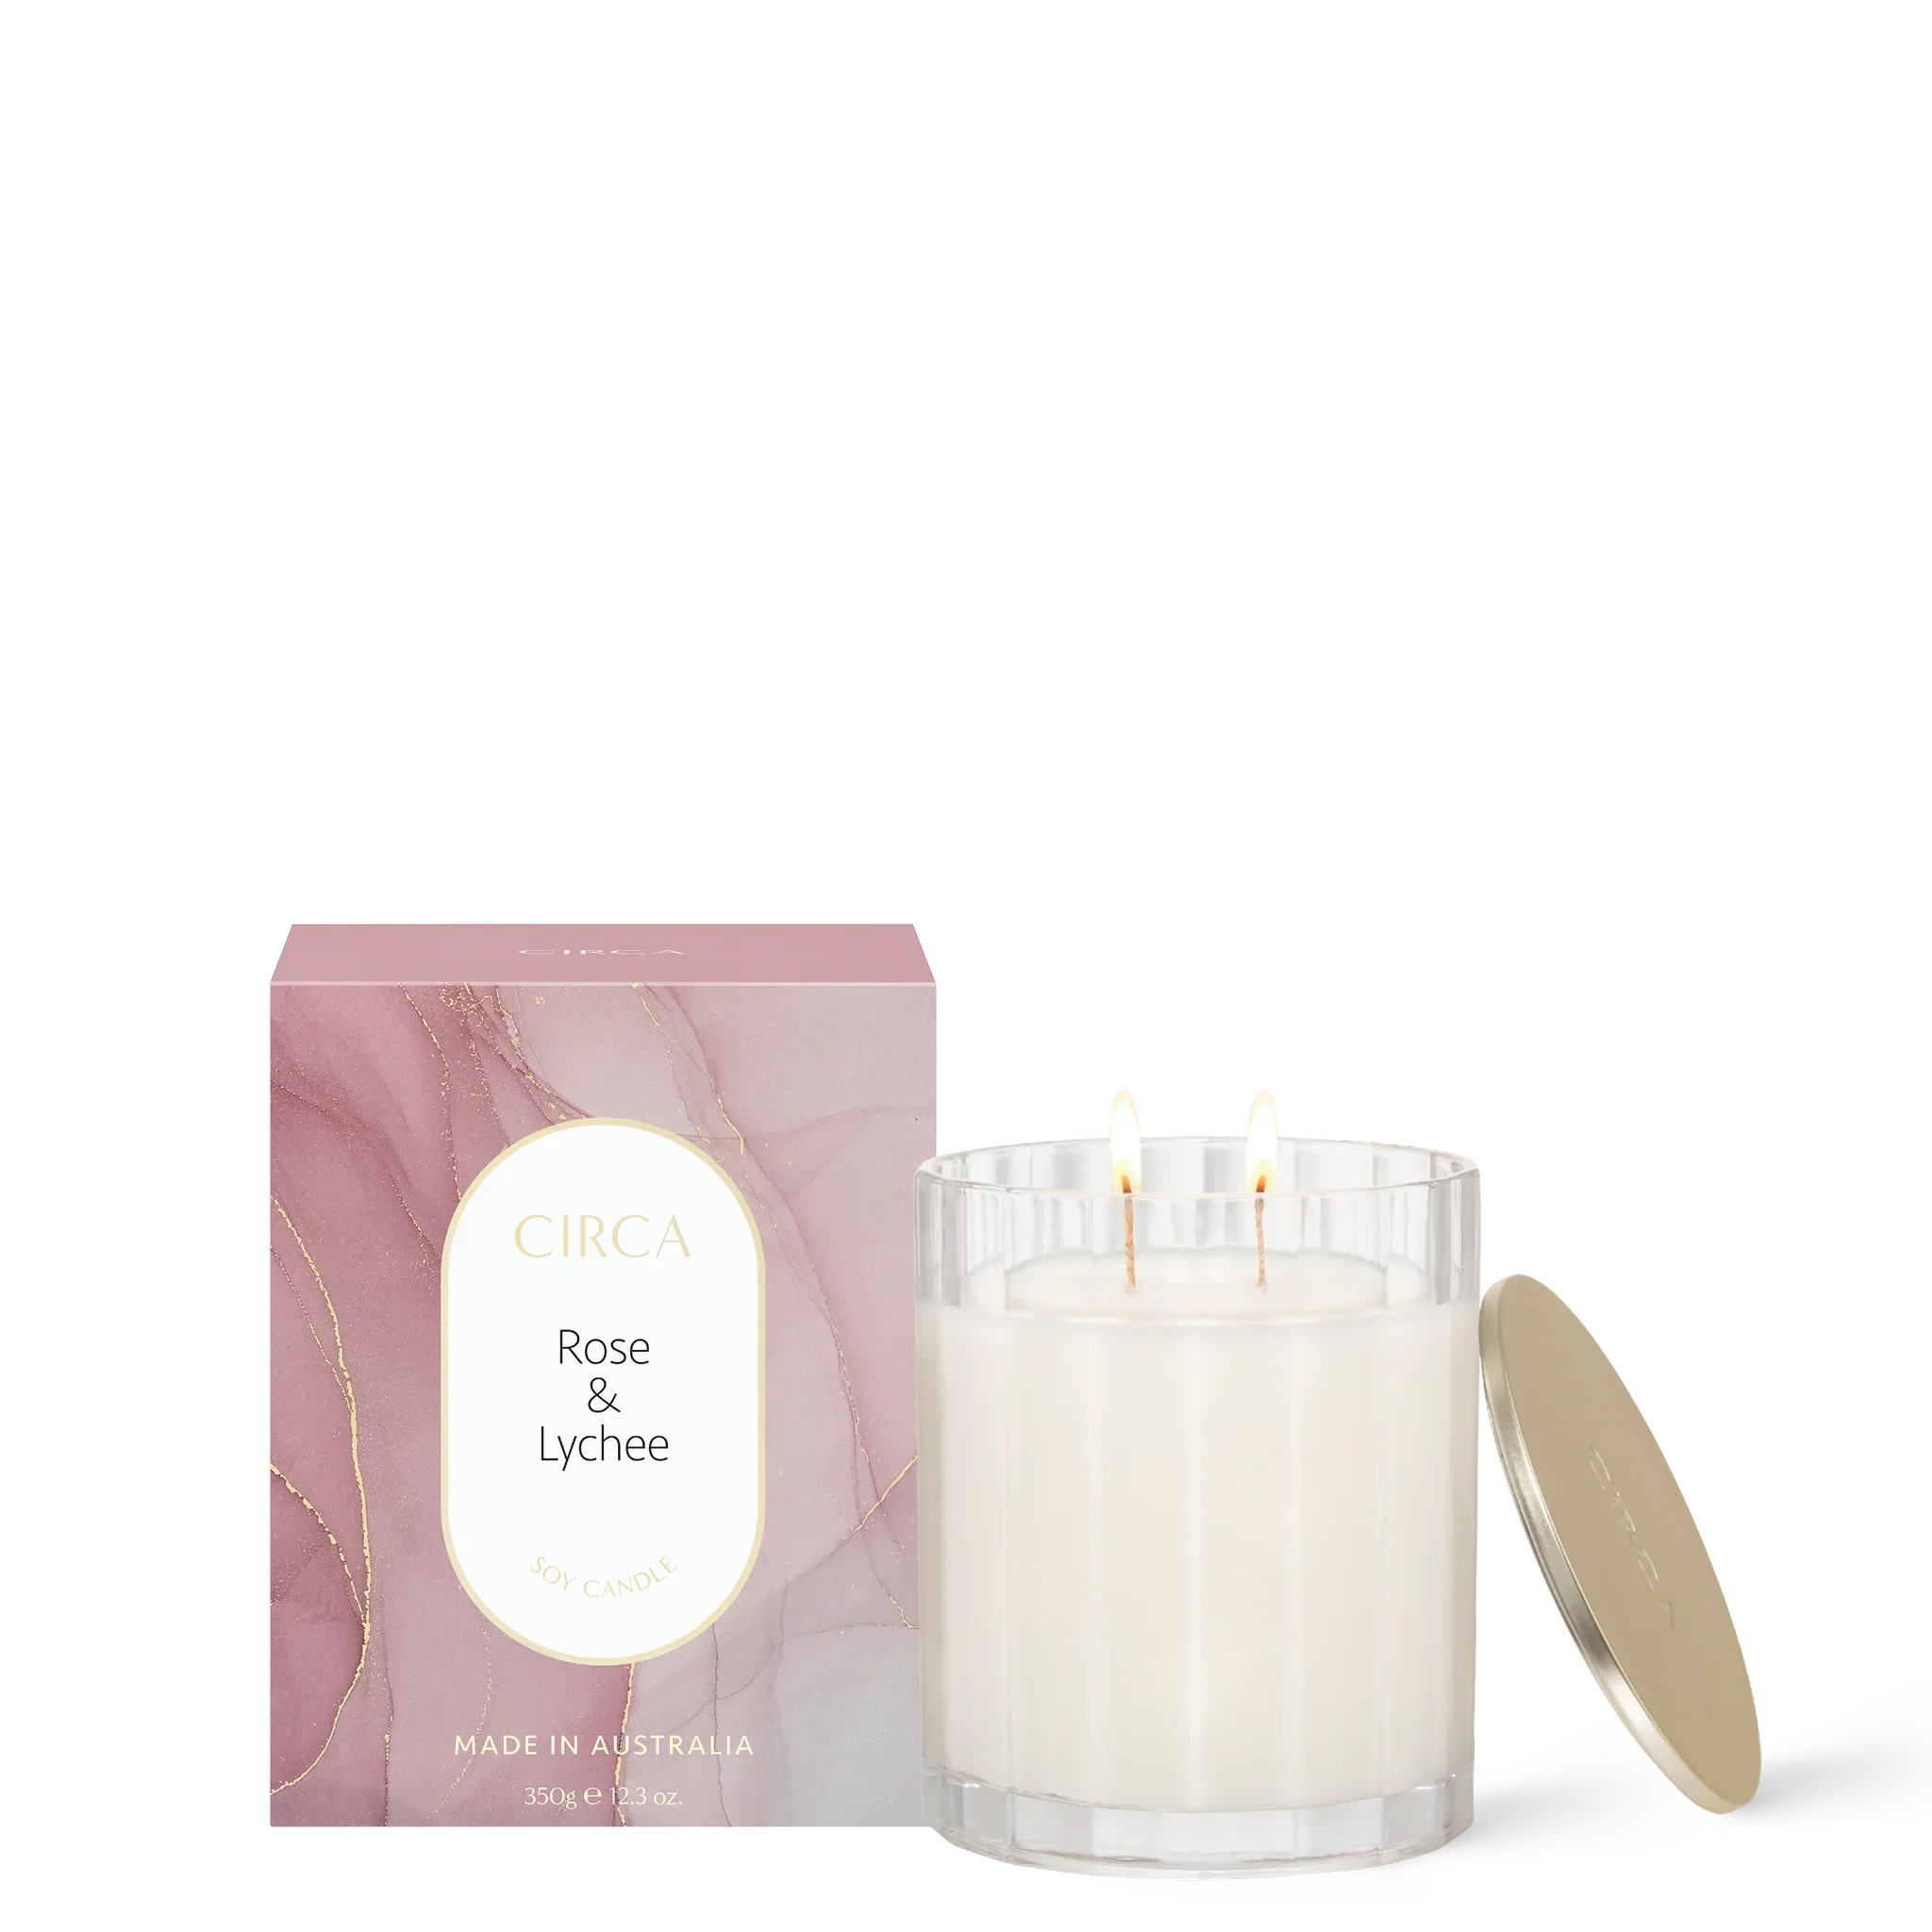 Rose & Lychee Soy Candle 350g